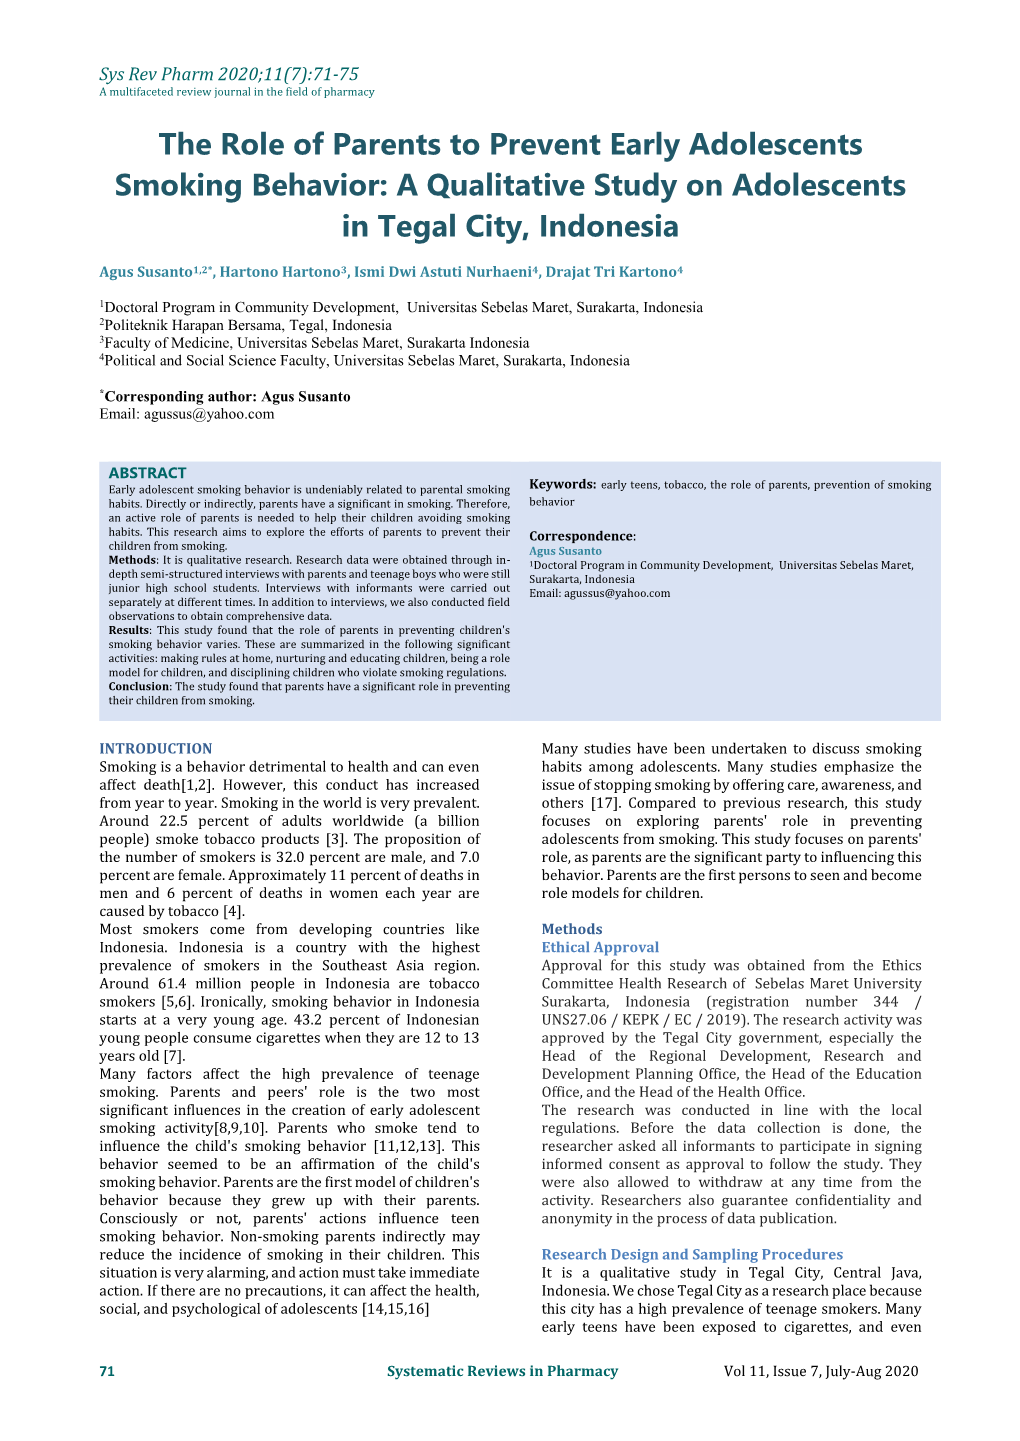 The Role of Parents to Prevent Early Adolescents Smoking Behavior: a Qualitative Study on Adolescents in Tegal City, Indonesia